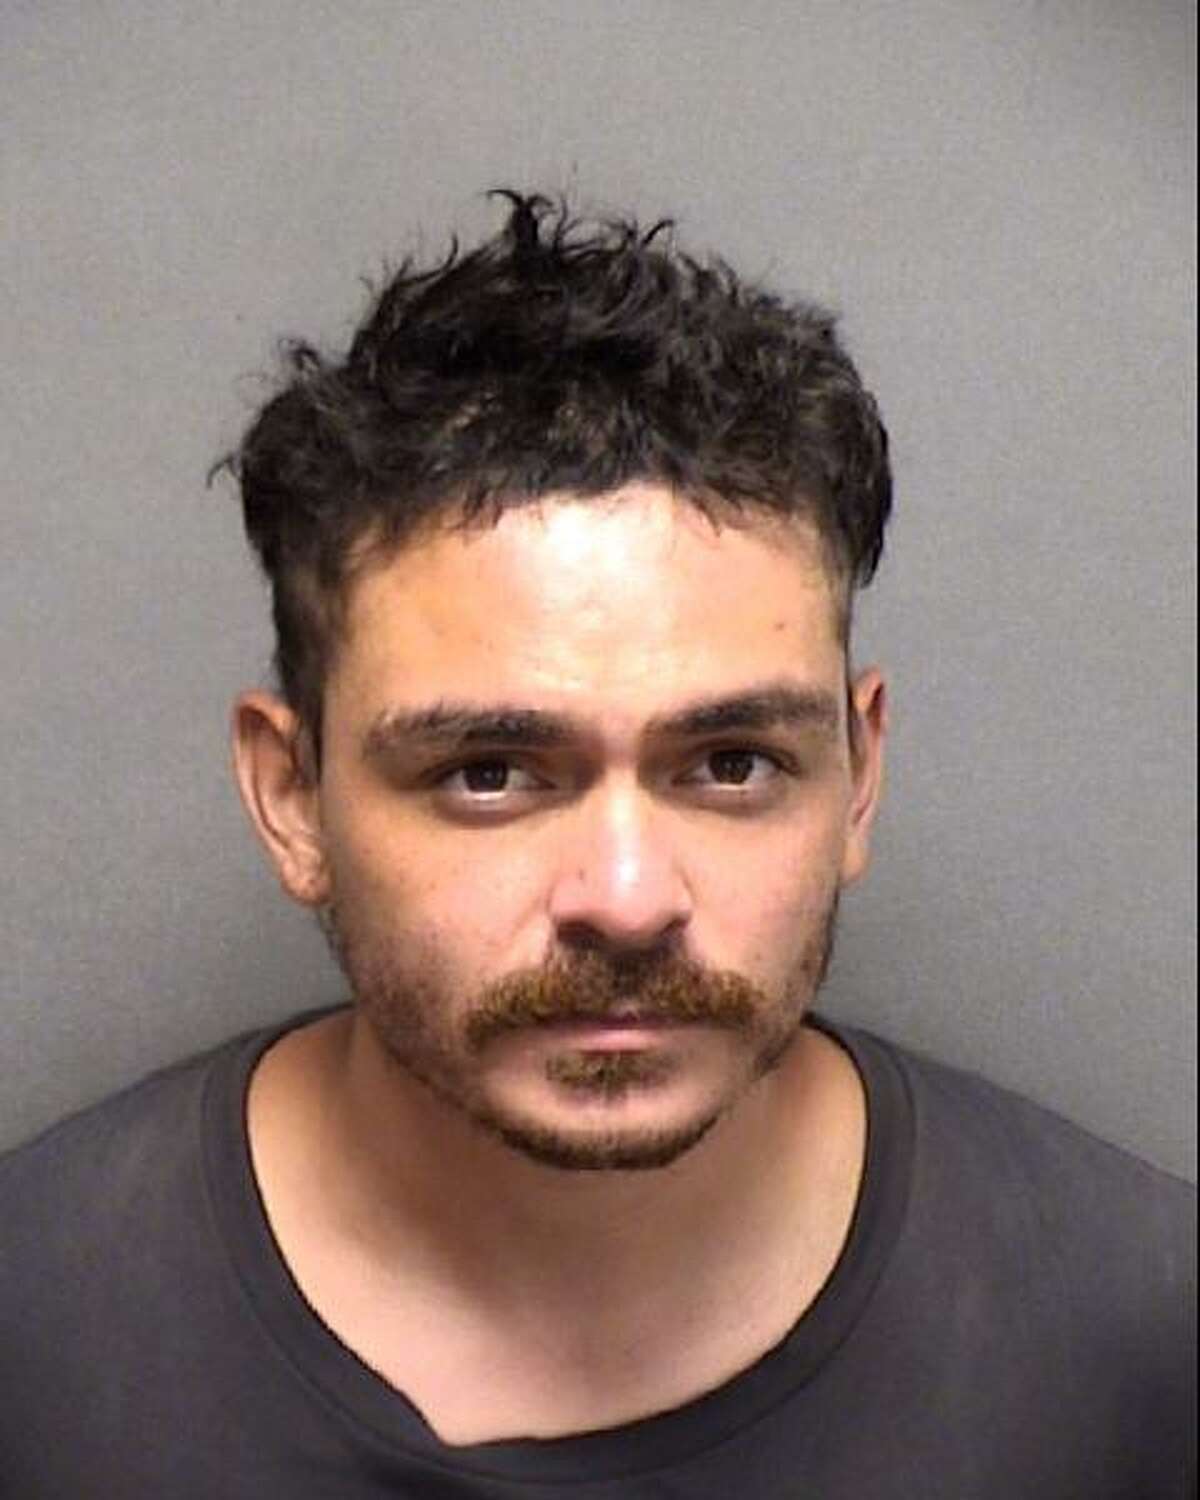 Jonathan Alfaro, 29, was charged with capital murder in connection with the fatal shooting of at least two people.